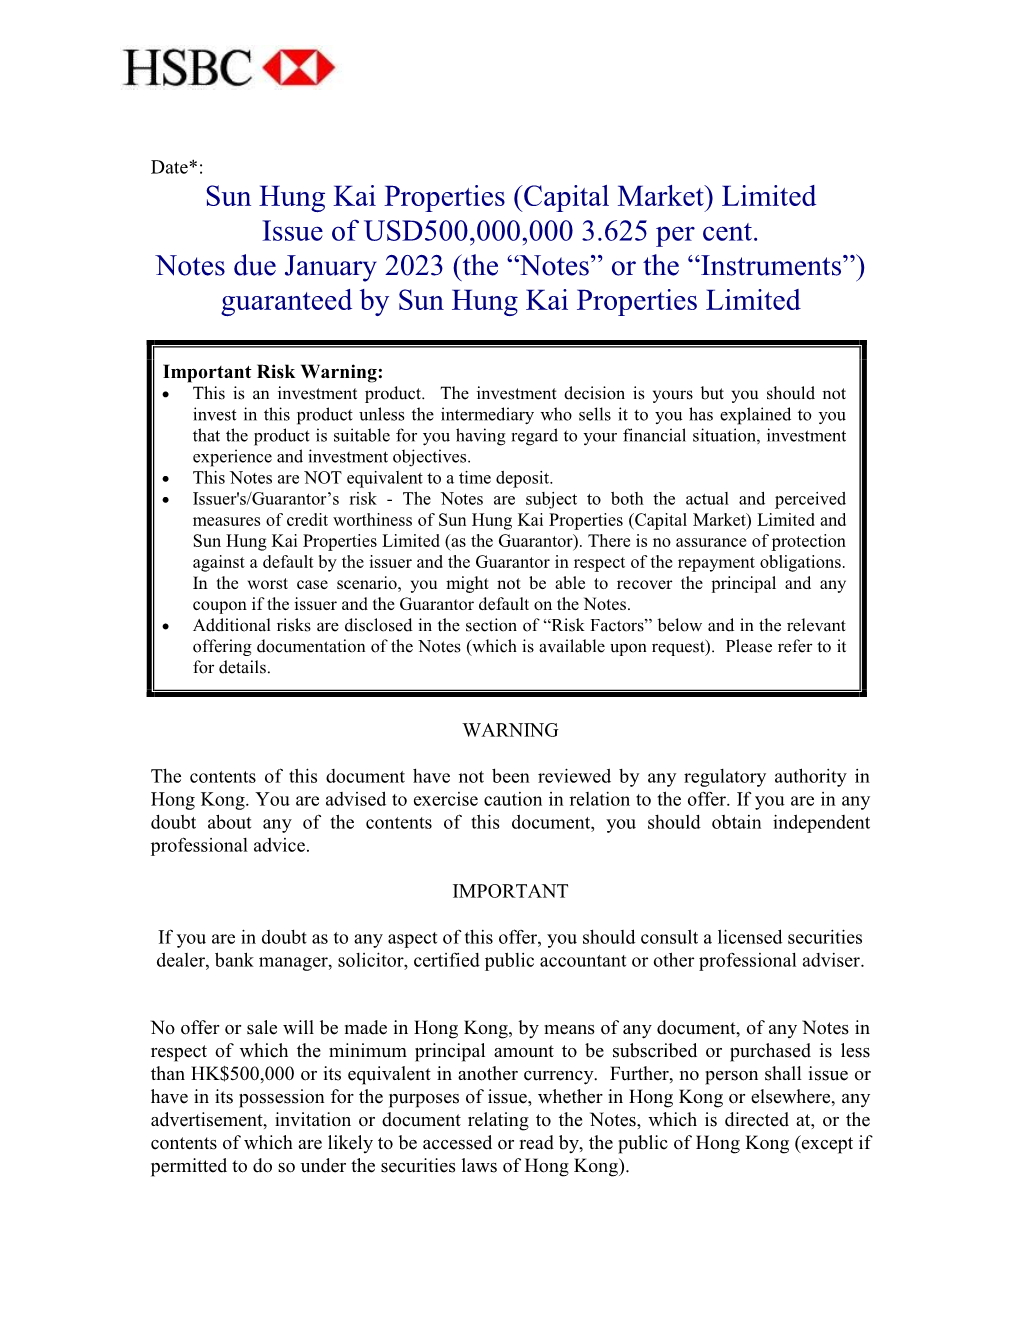 Sun Hung Kai Properties (Capital Market) Limited Issue of USD500,000,000 3.625 Per Cent